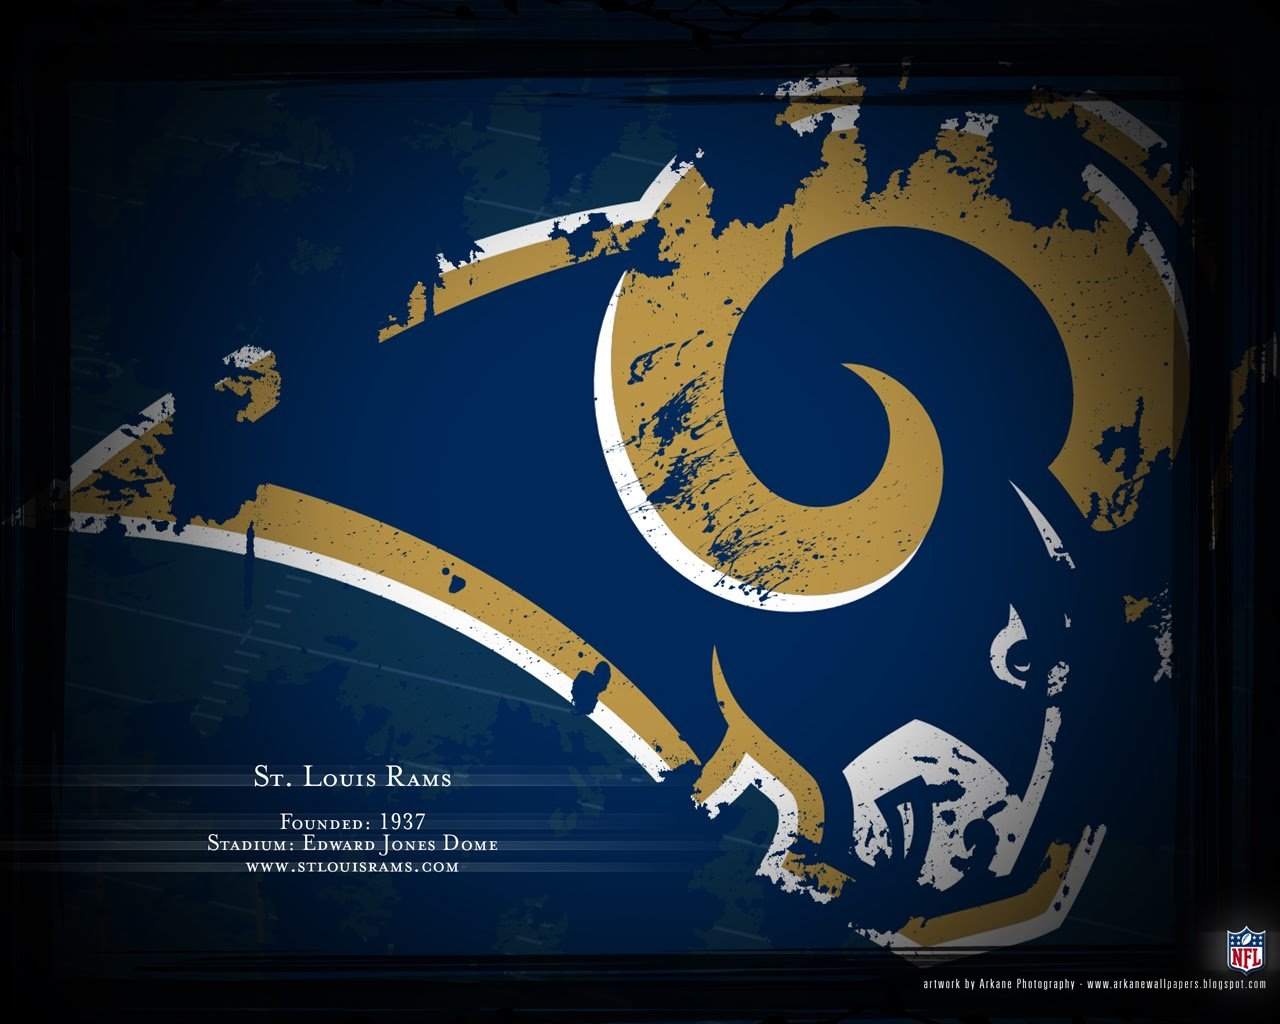 Download hd 1280x1024 St. Louis Rams desktop background ID:67303 for free